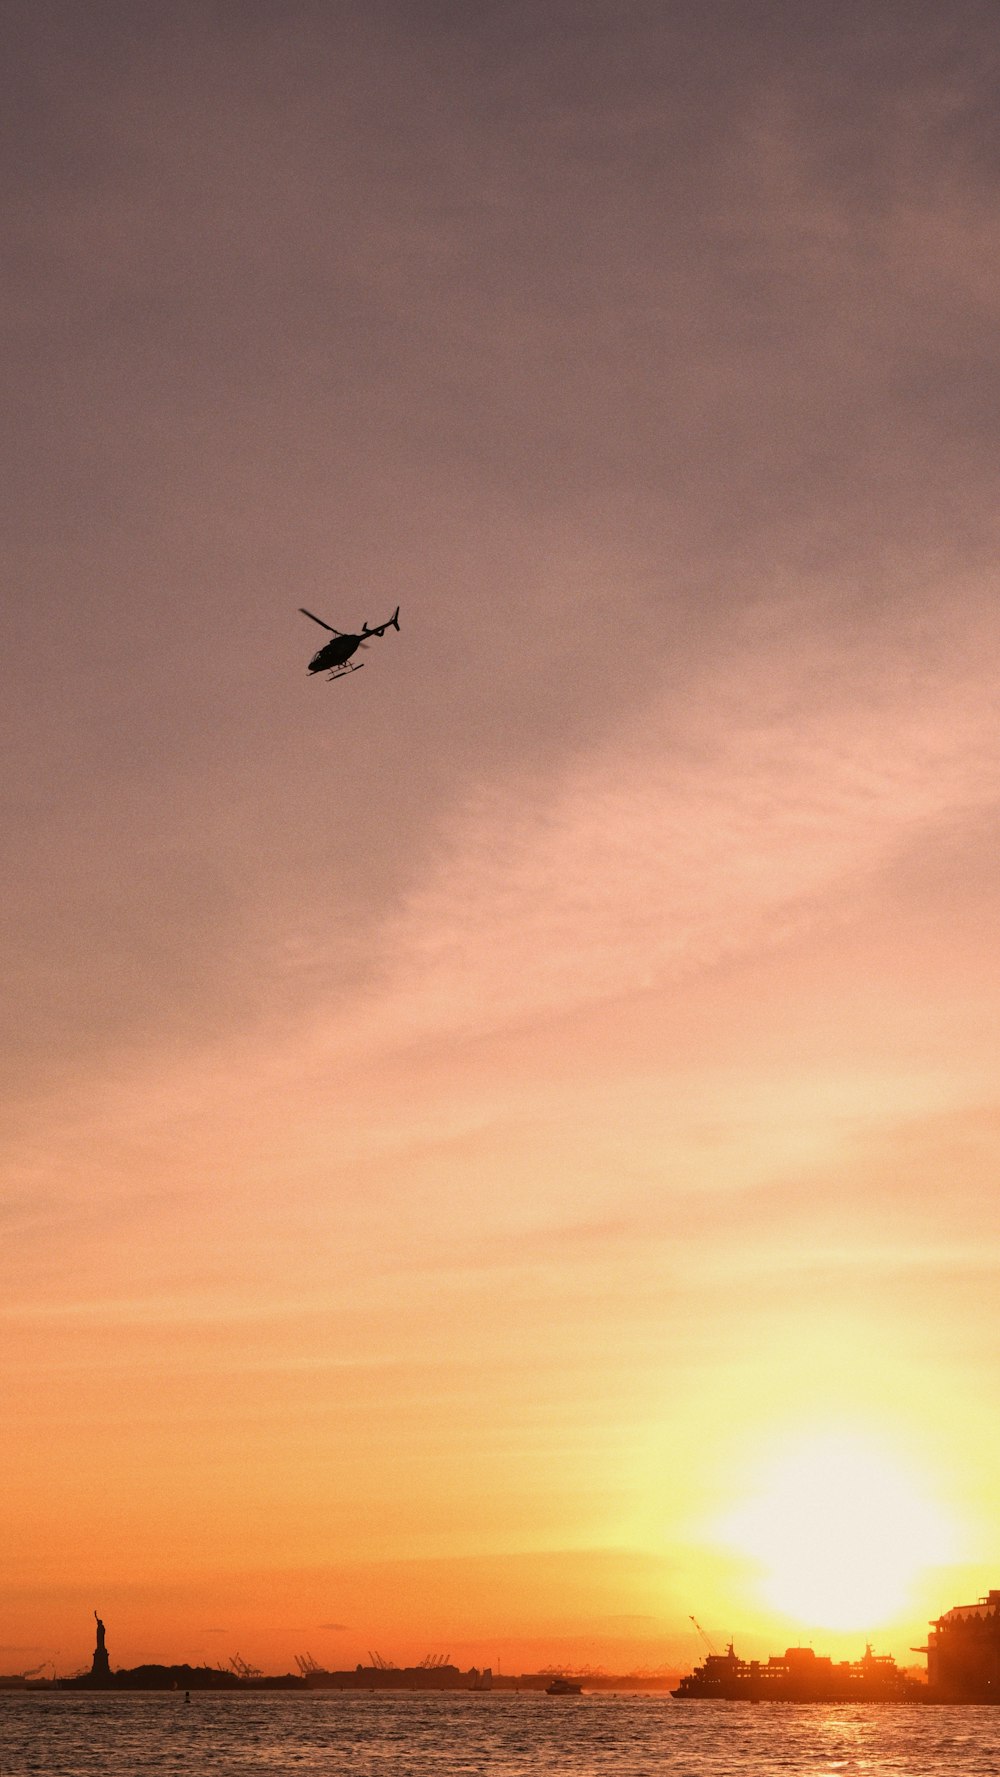 a helicopter flying over a body of water at sunset